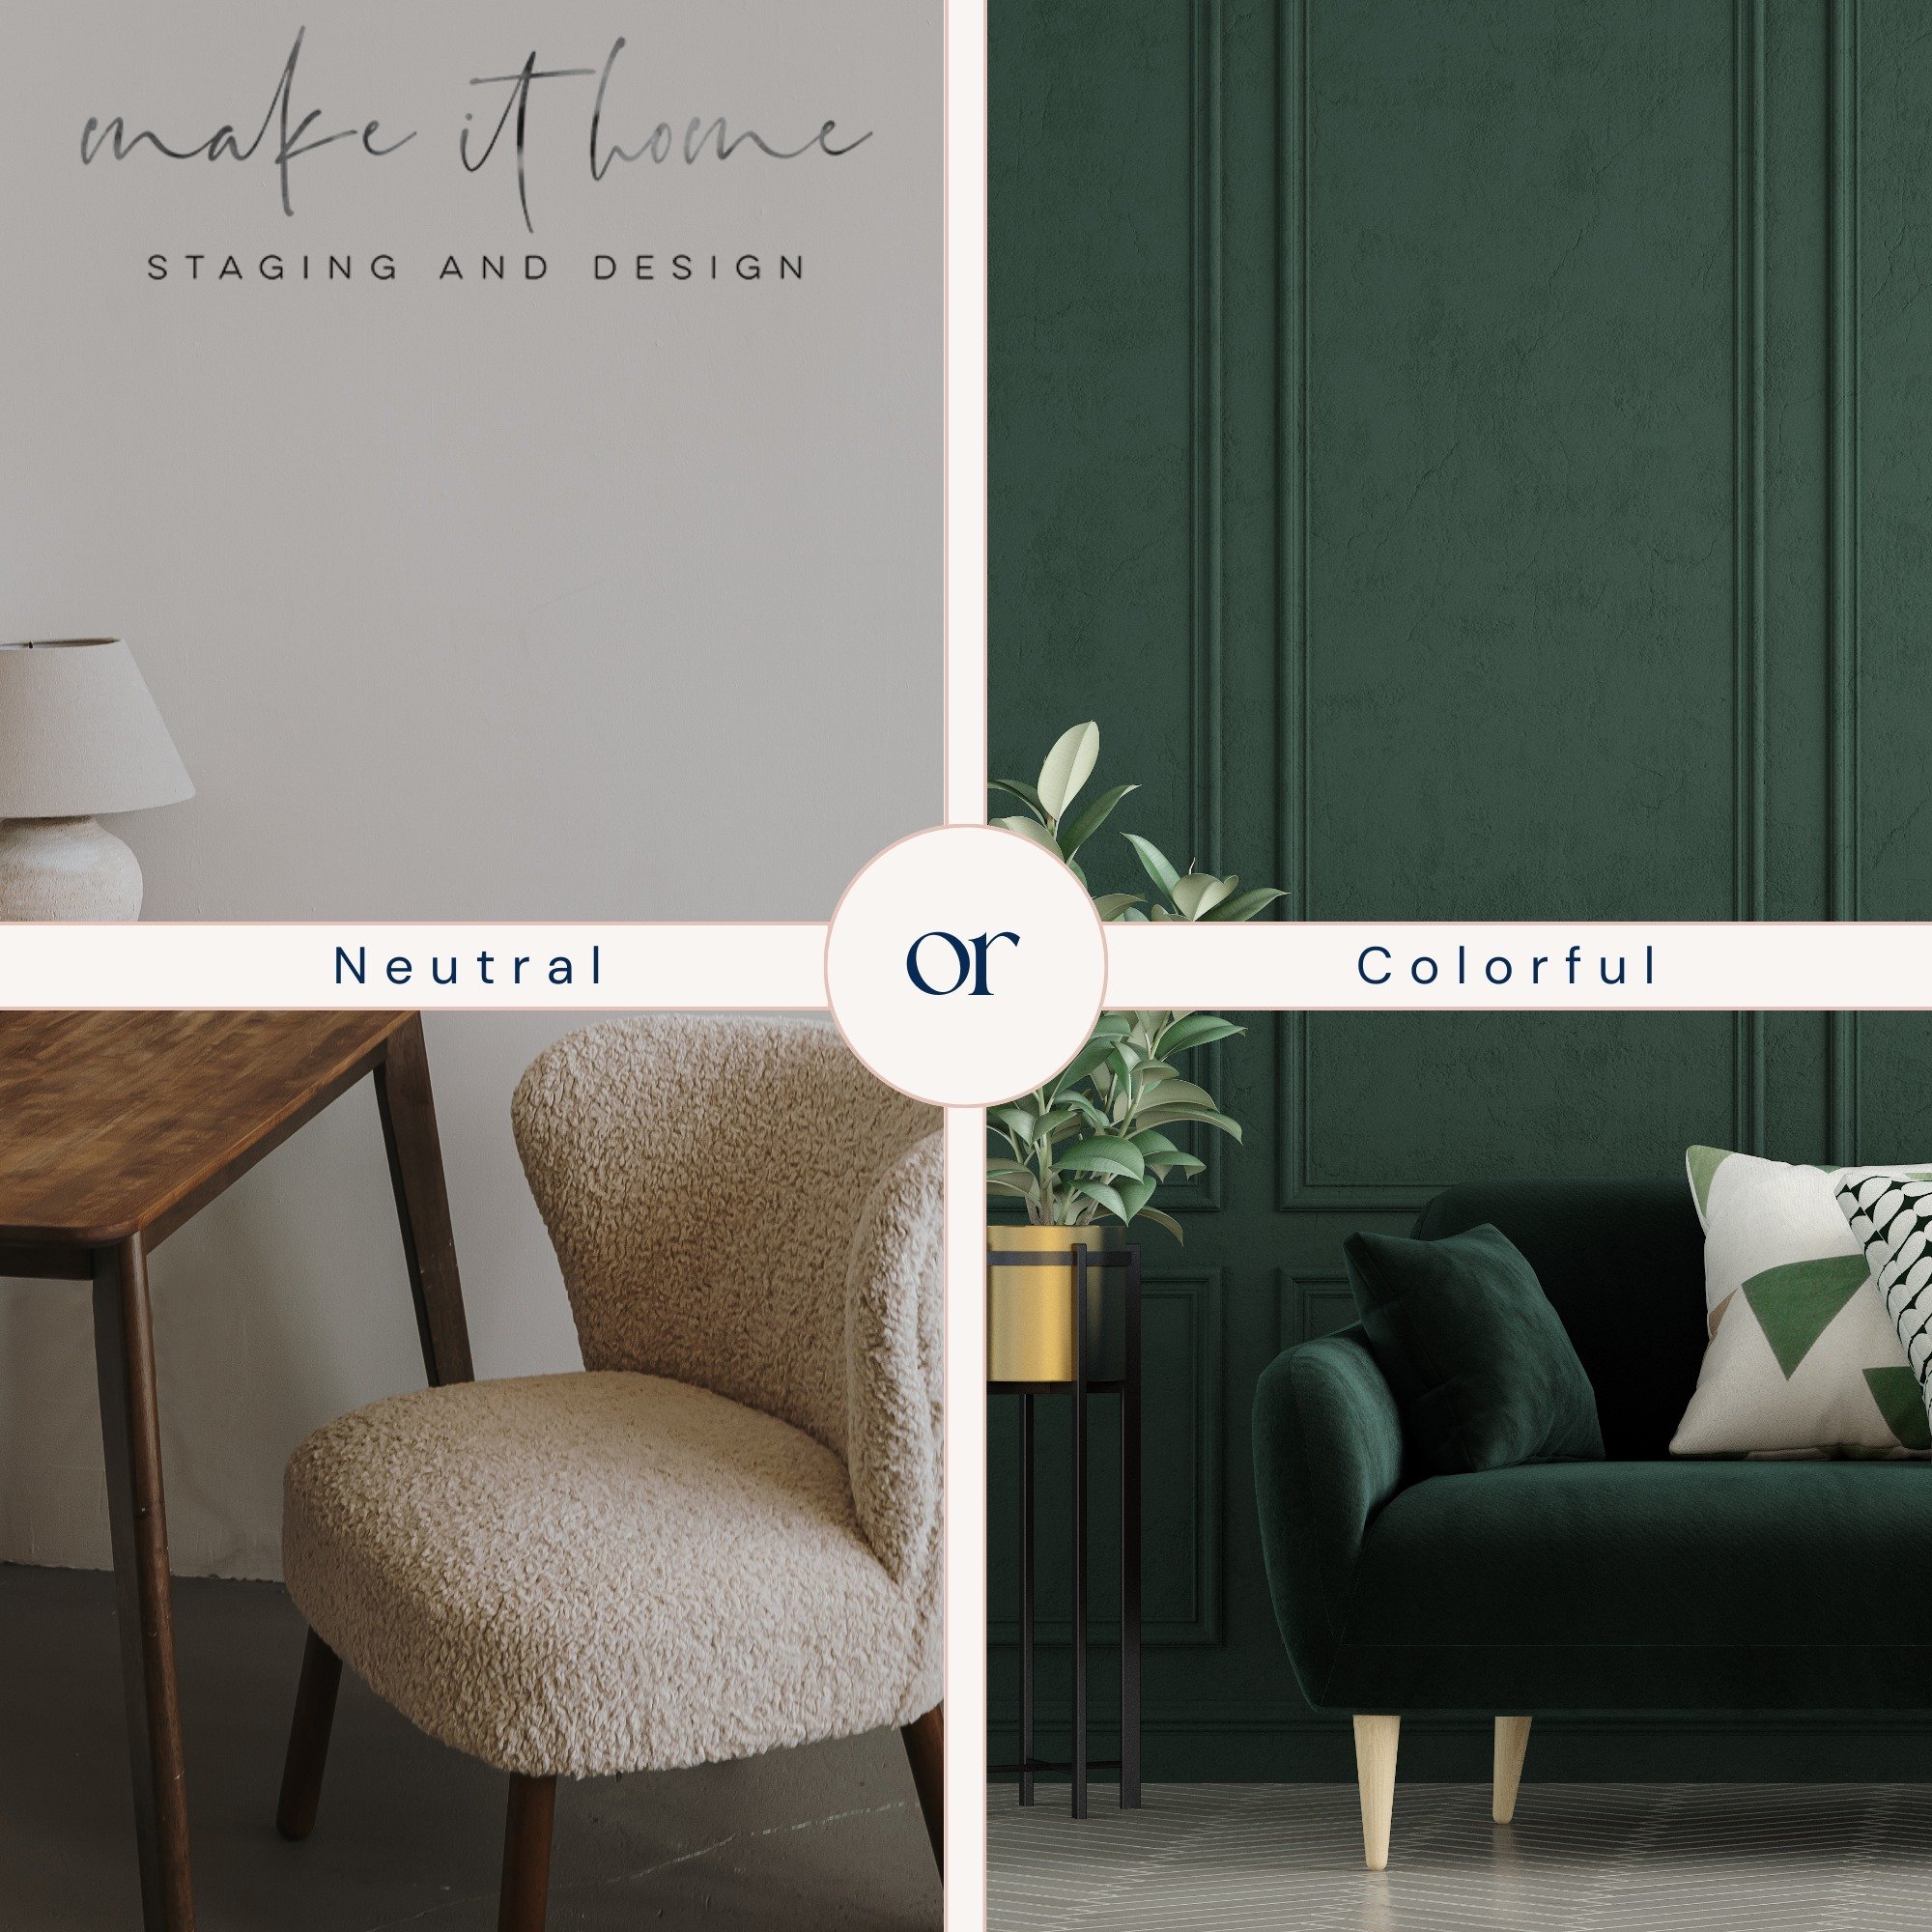 This or That? Do you prefer a neutral or colorful palette? Let us know in the comments!

#thisorthat #neutral #colorful #interiordesign #homedecor #homedesign #makeithome #mih